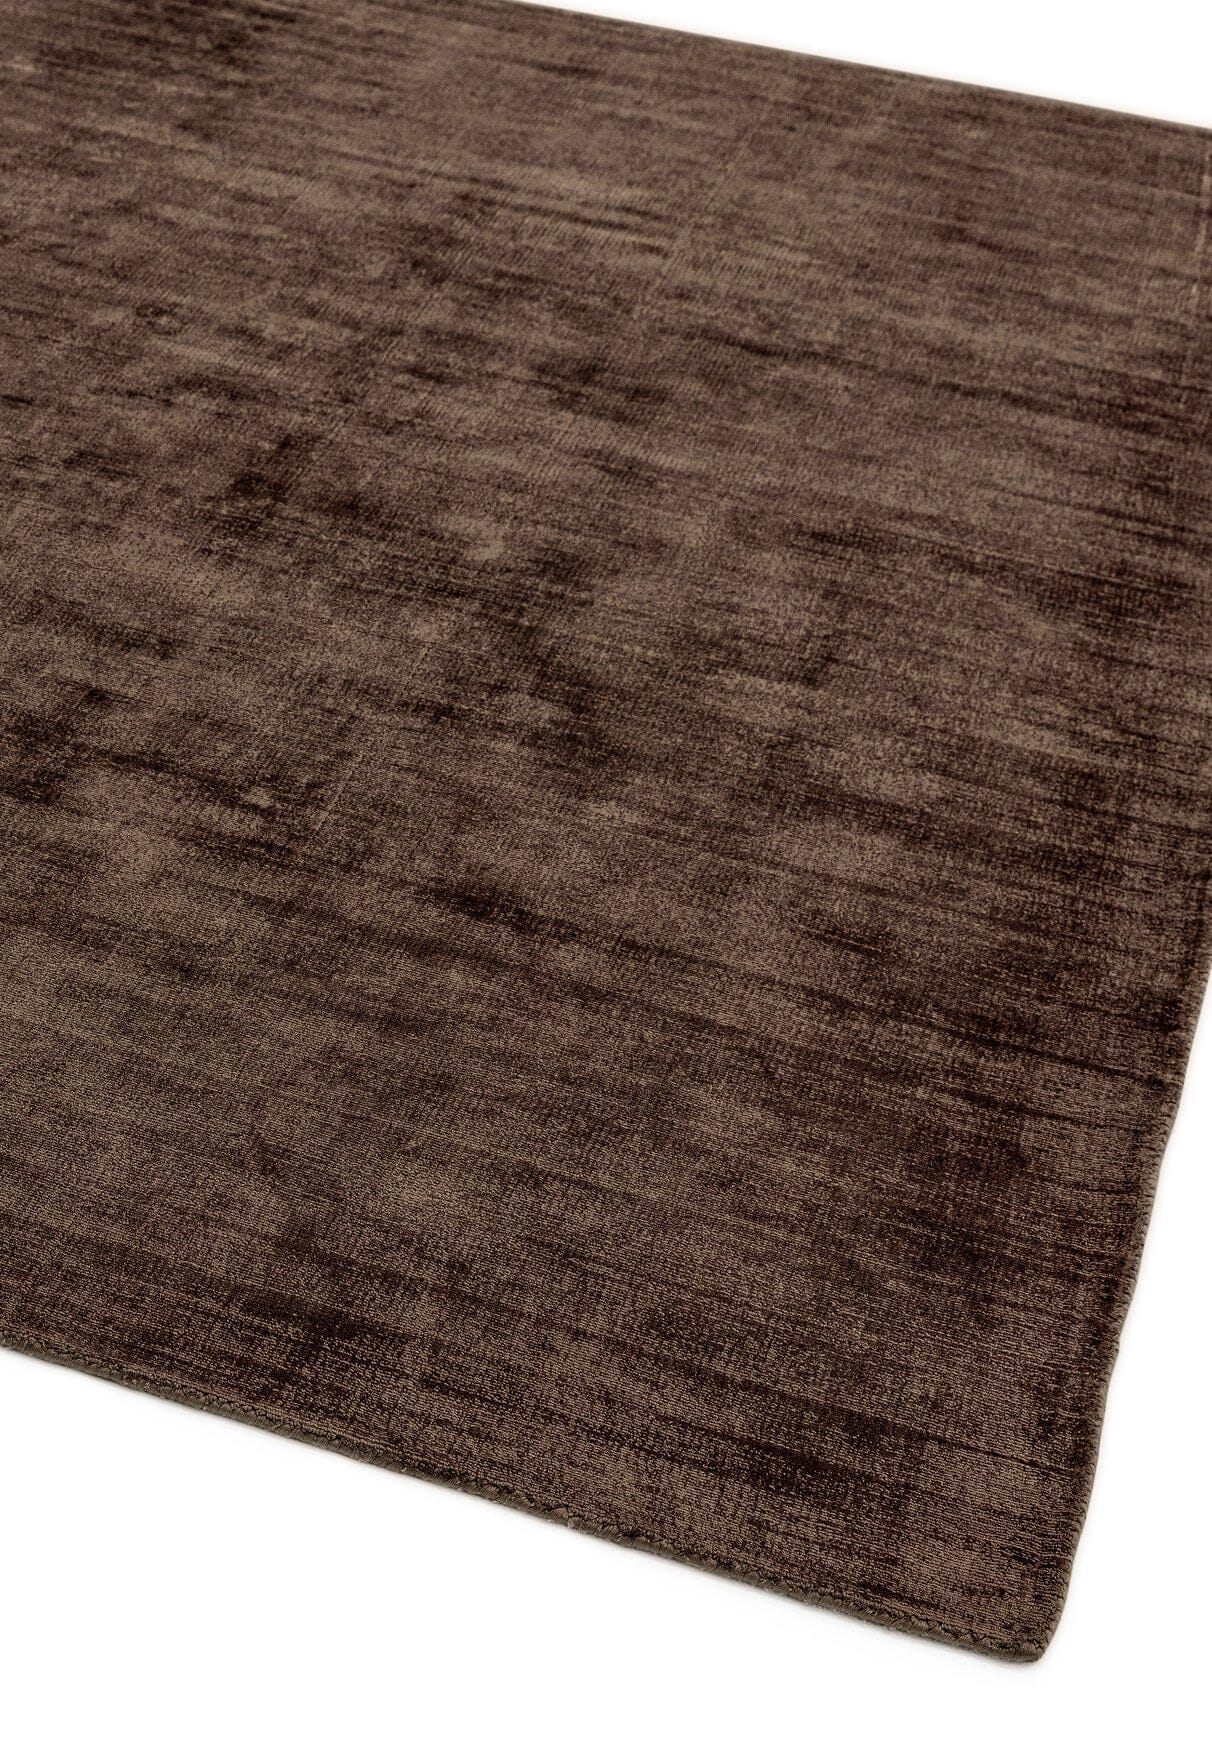 Asiatic Carpets Blade Hand Woven Runner Chocolate - 66 x 240cm